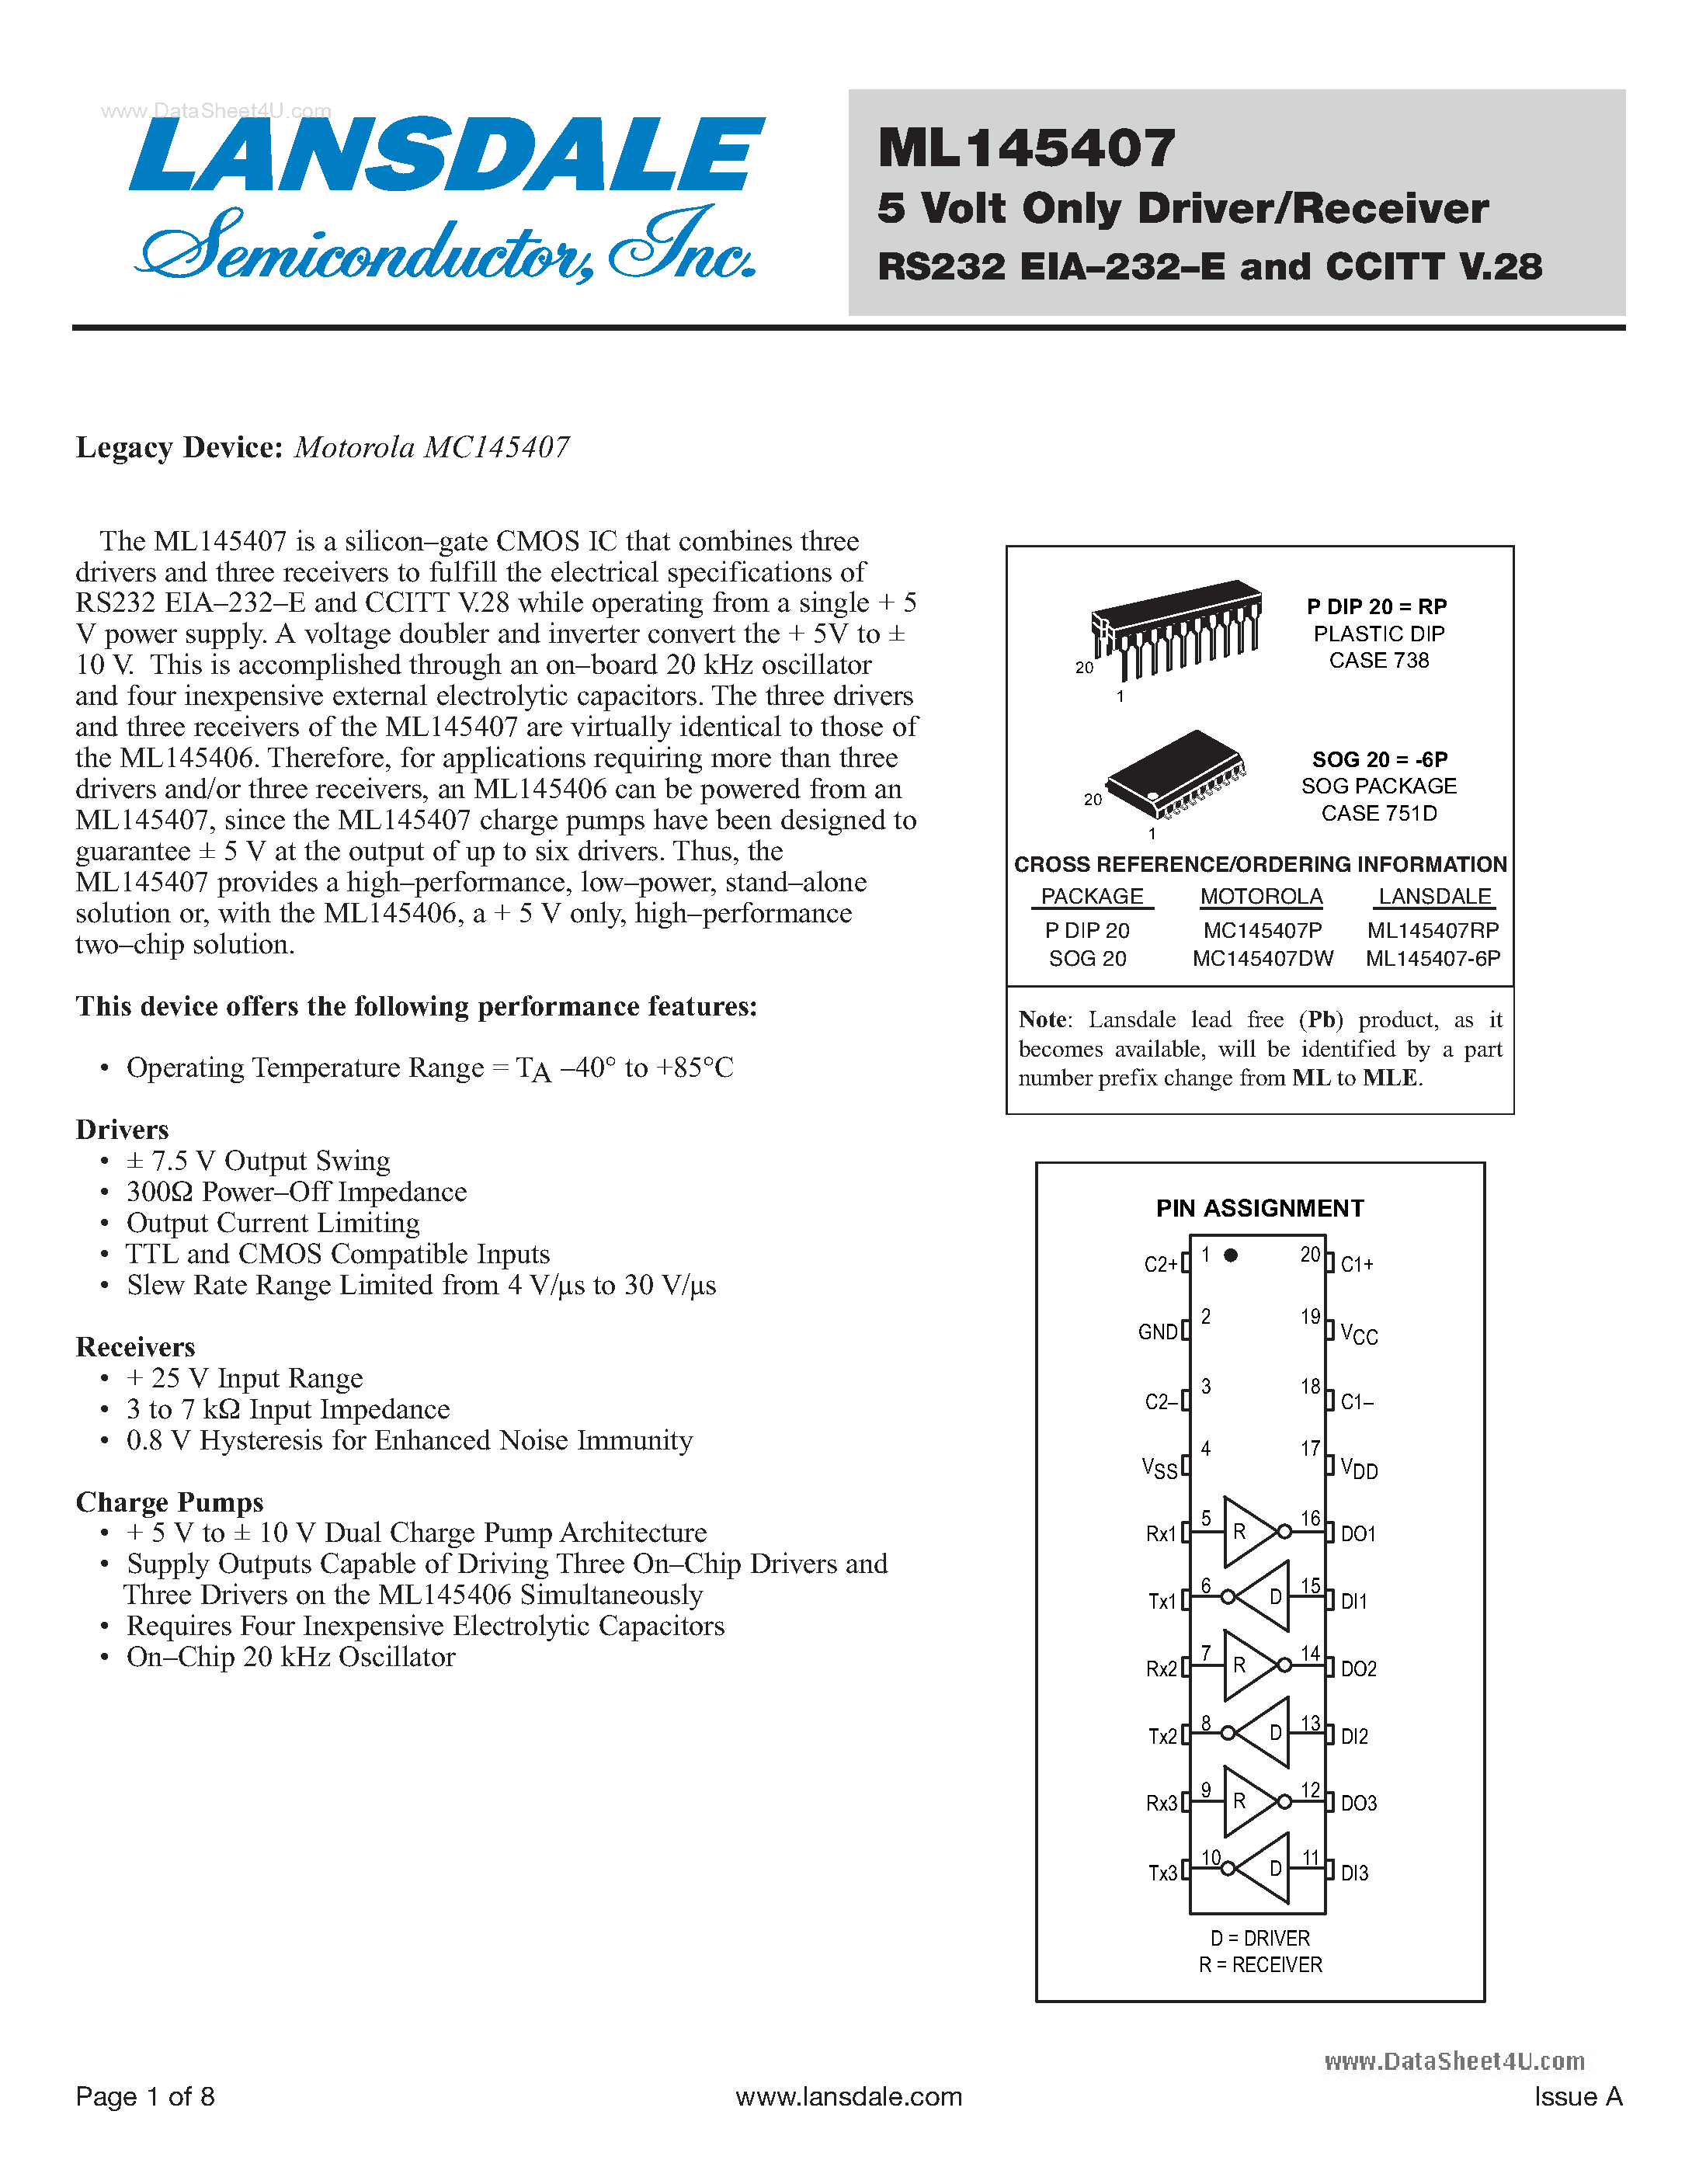 Datasheet ML145407 - 5 Volt Only Driver/Receiver page 1